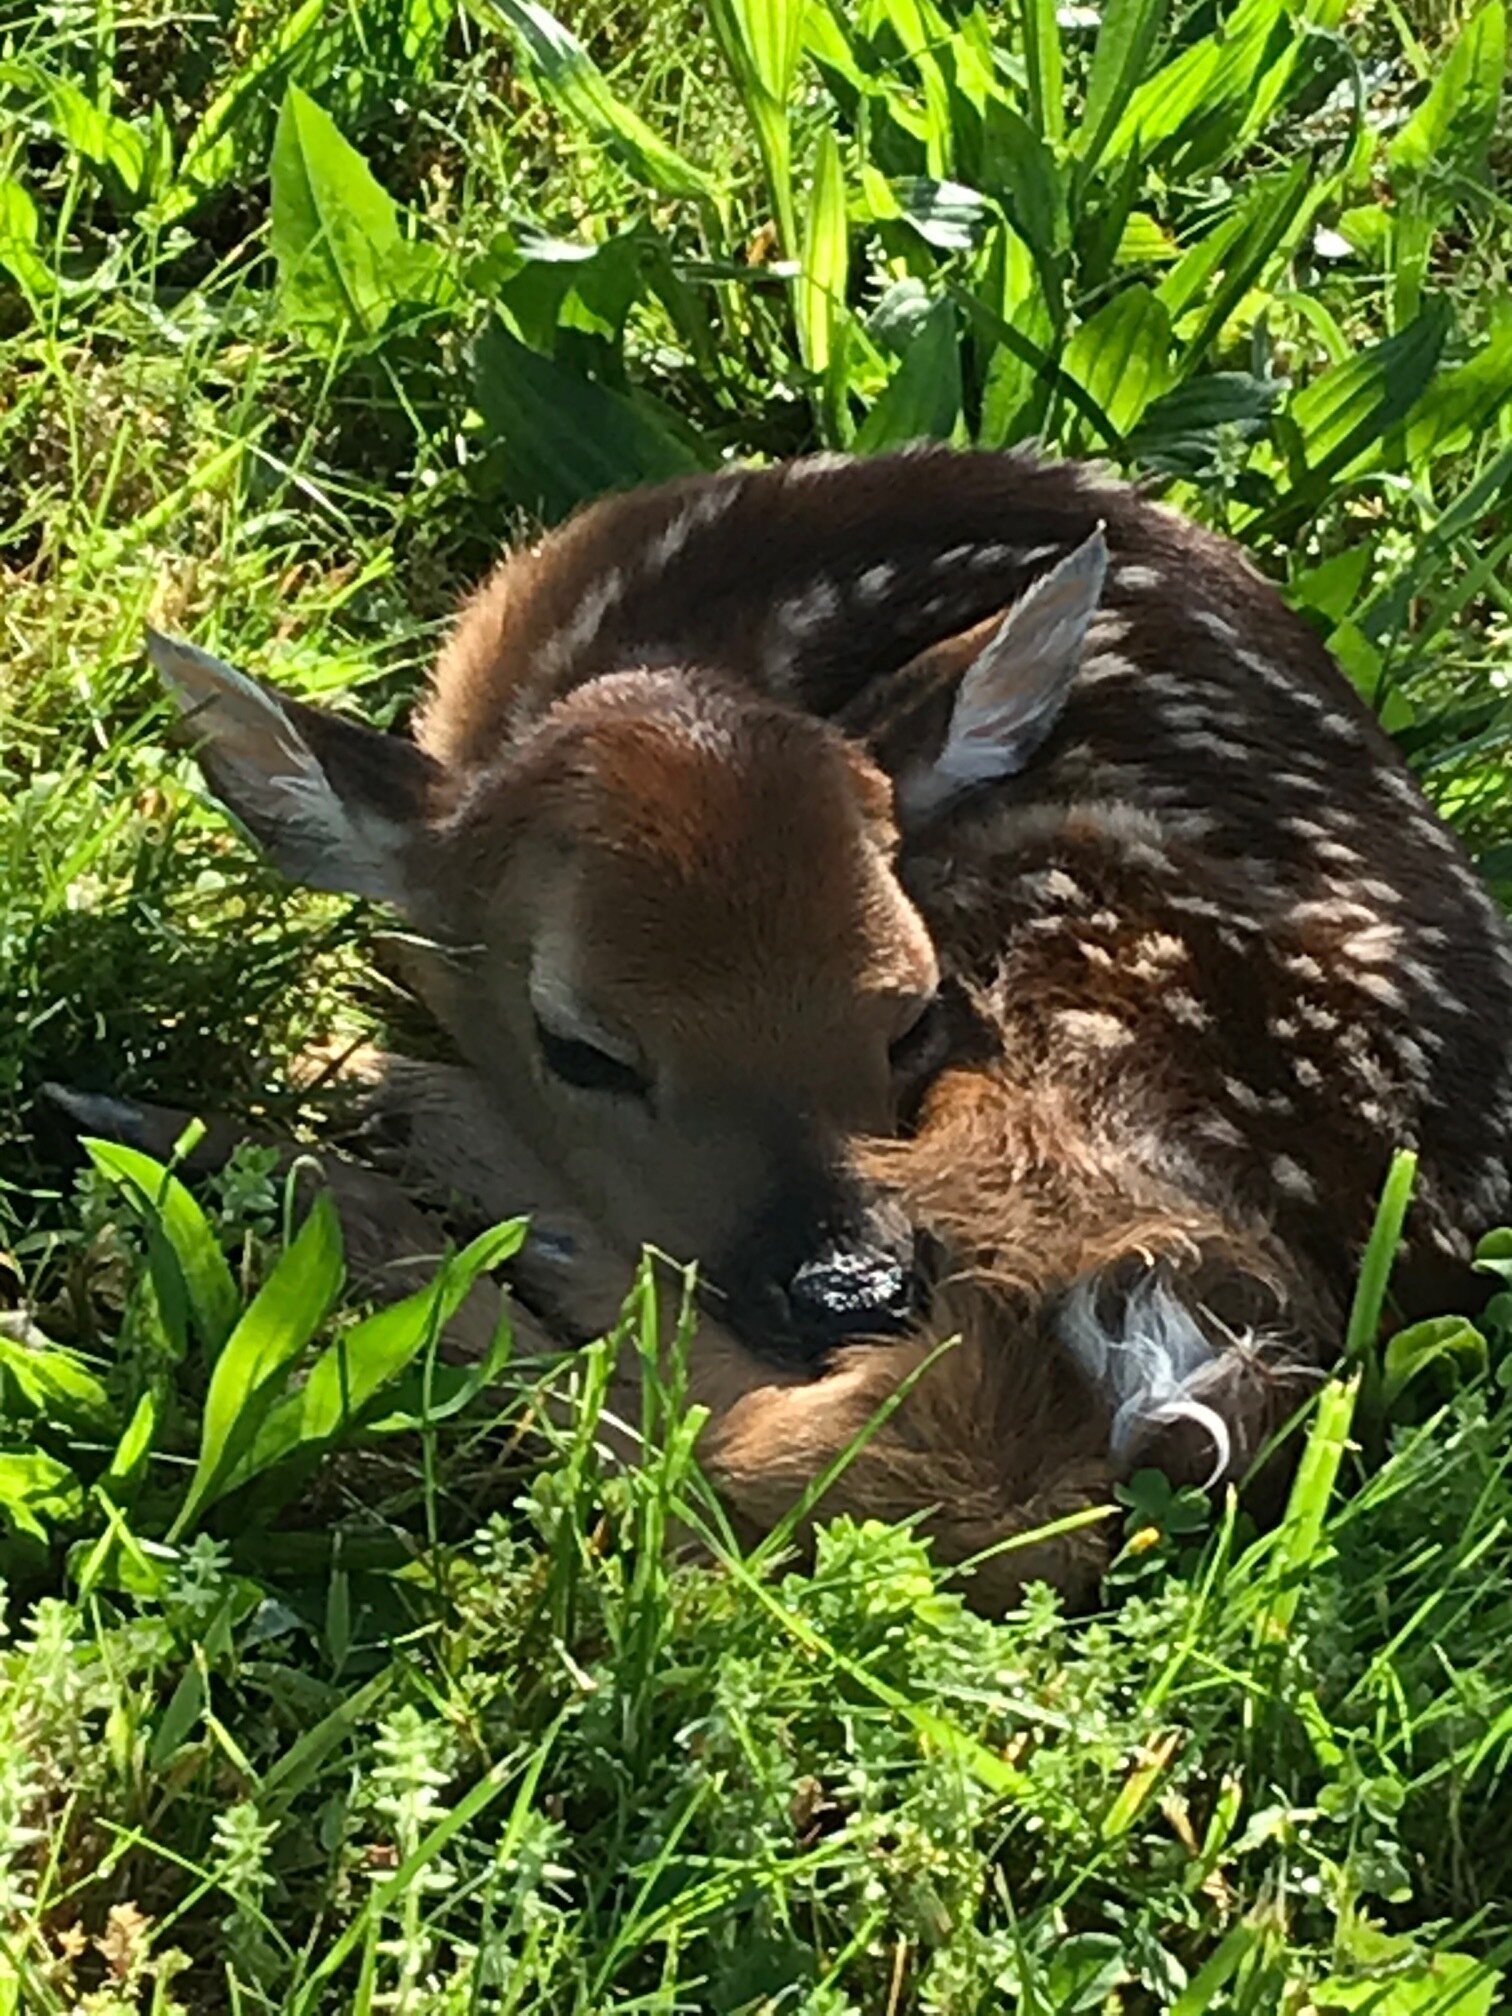  A young fawn nestles in the long grass under a Hardy Orange Tree outside the Oak Spring Garden Library.  